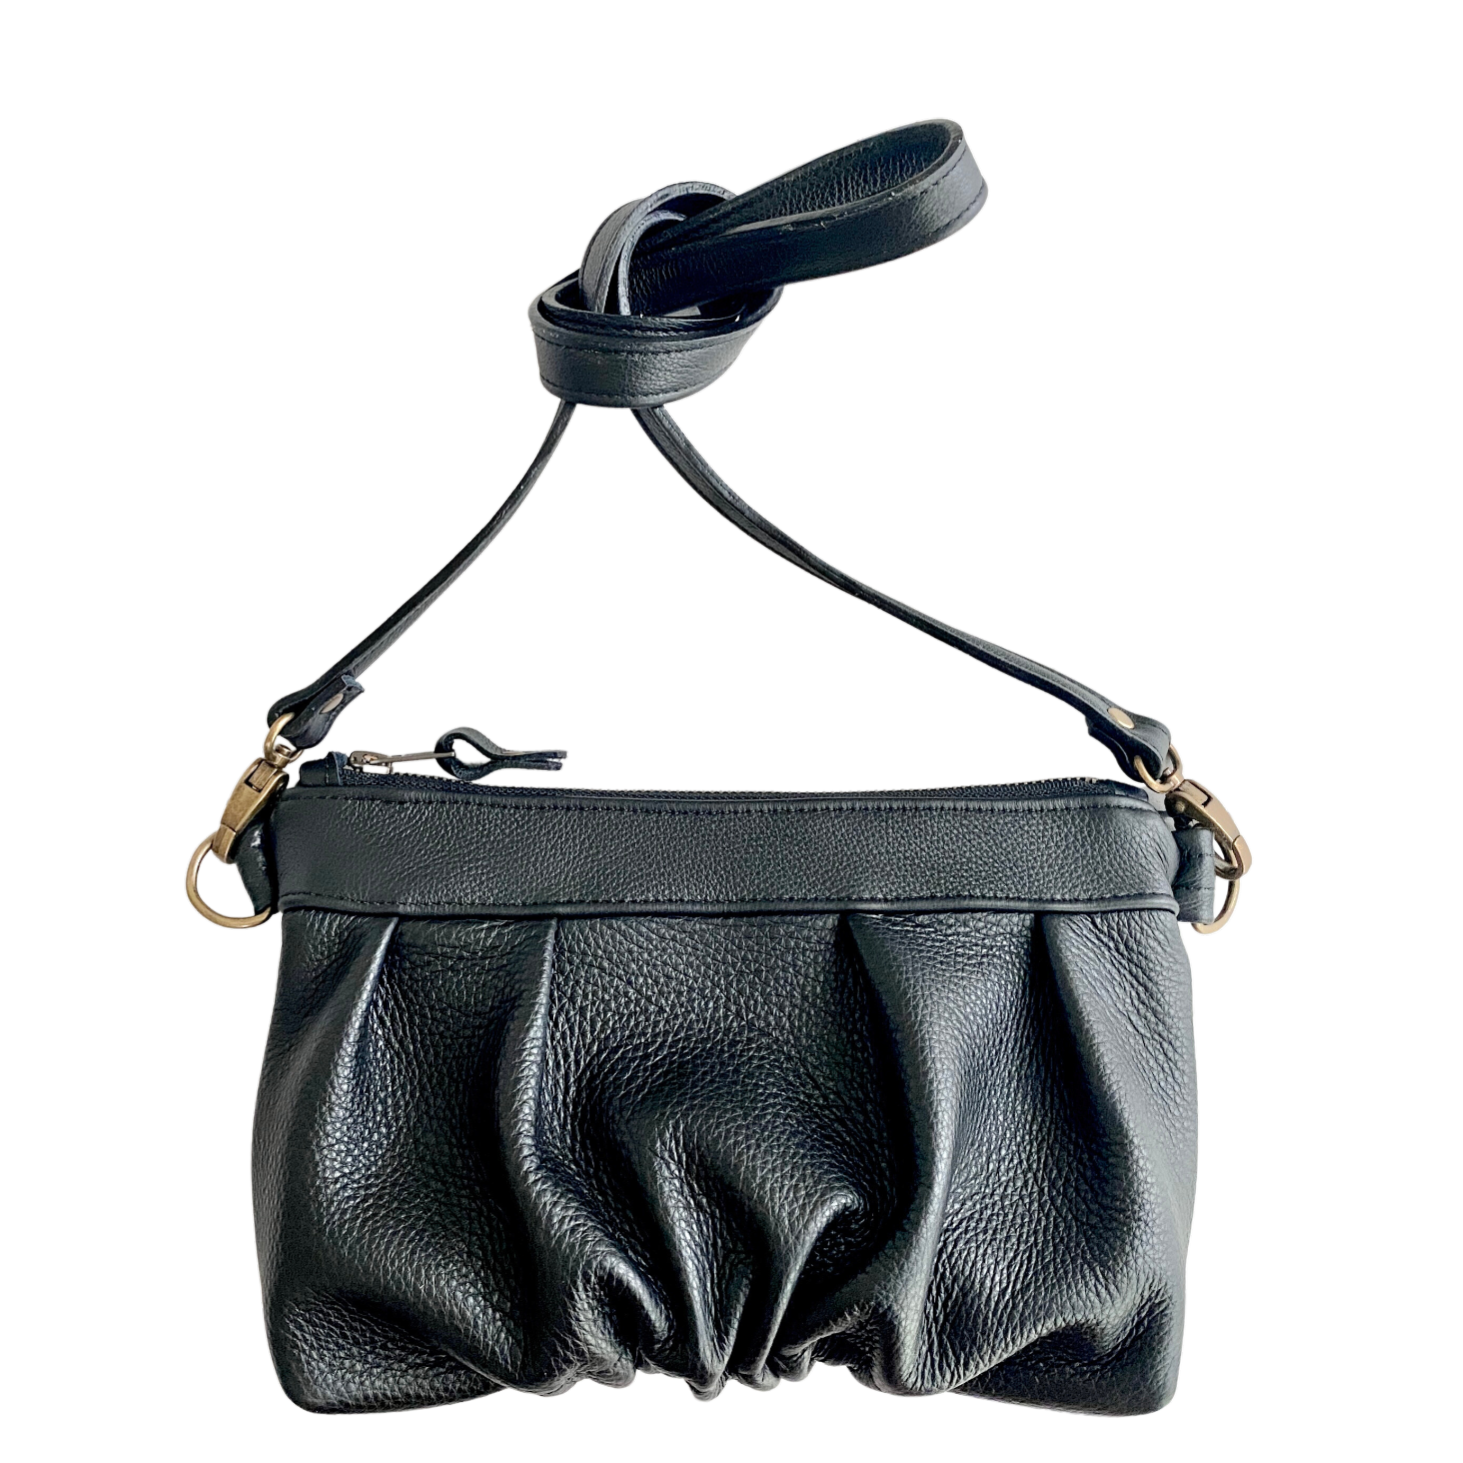 Ruche Clutch in Onyx black fullgrain cowskin leather with pleated detail, and crossbody strap